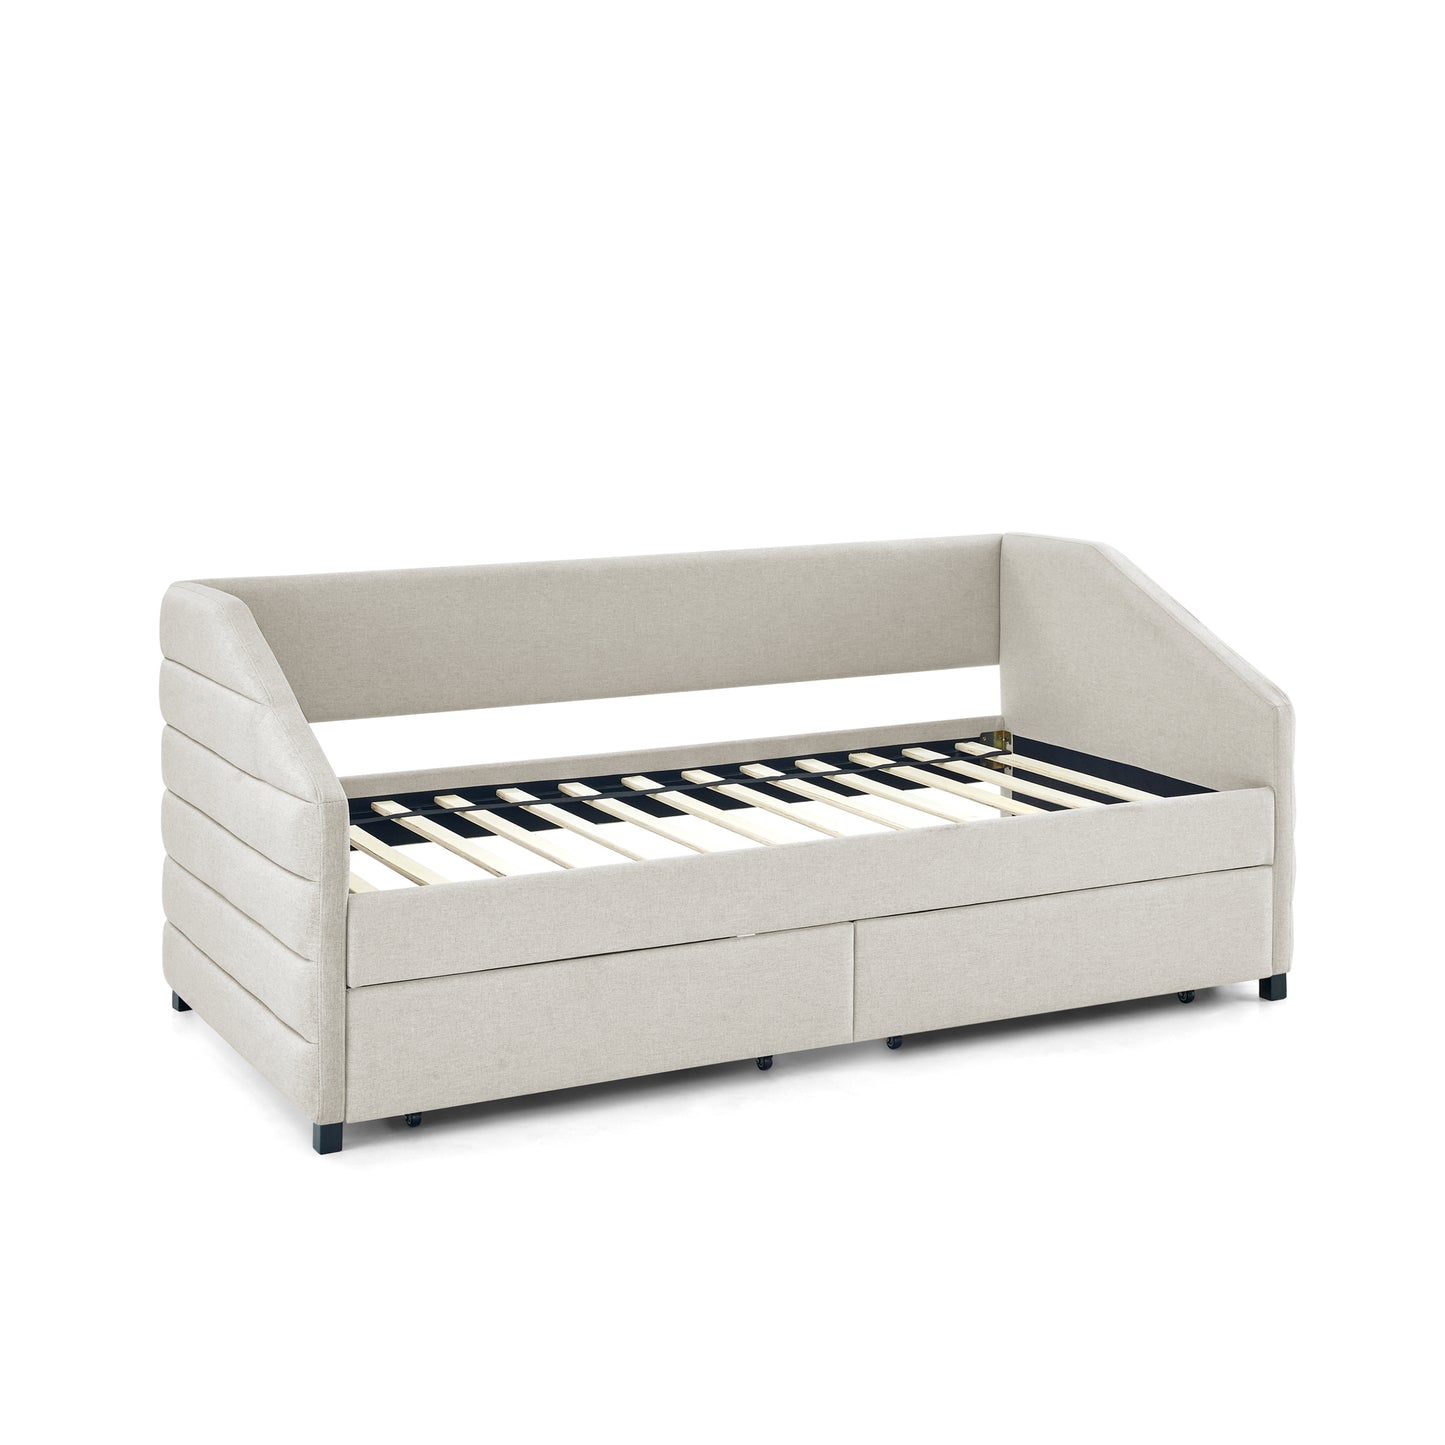 Twin Size Upholstered Tufted Daybed with Two Drawers, Linen Fabric, Beige (82.5"x42.5"x34")